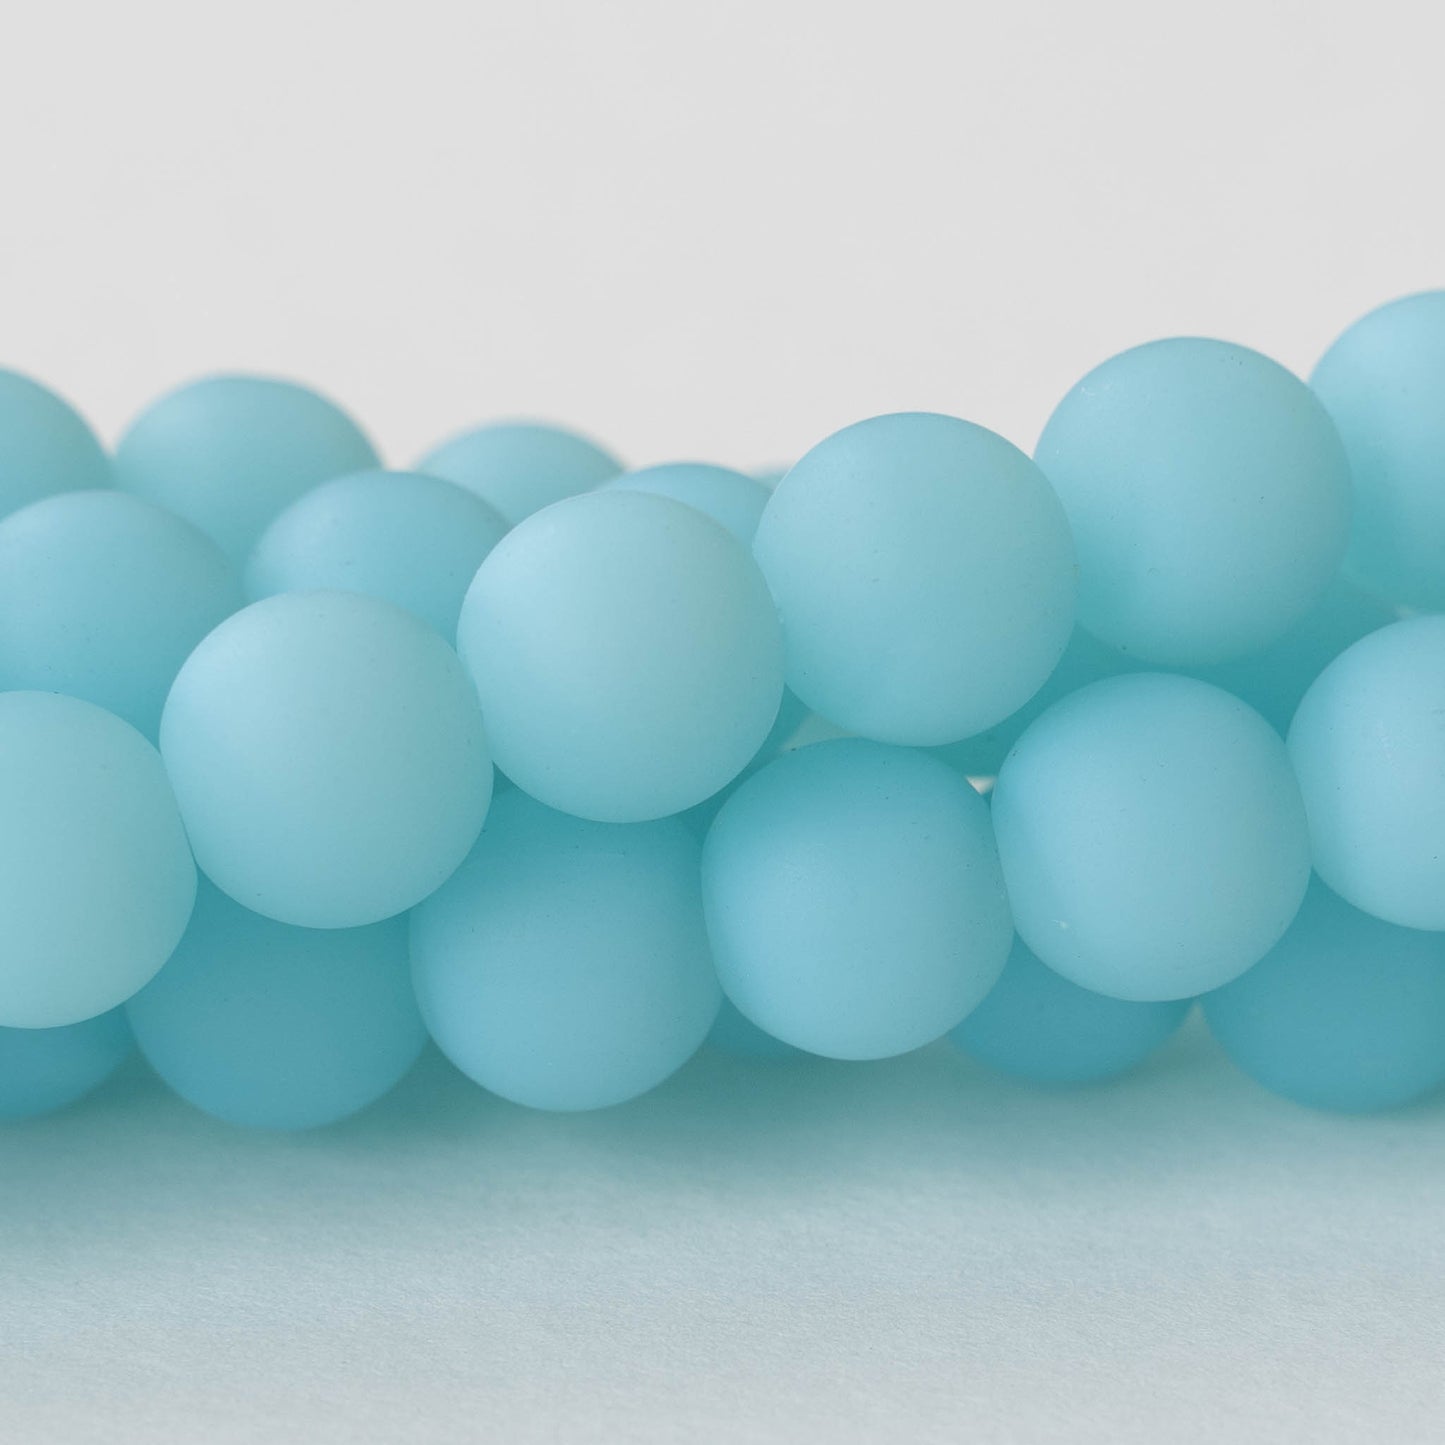 10mm Frosted Glass Rounds - Opaque Aqua - 21 beads